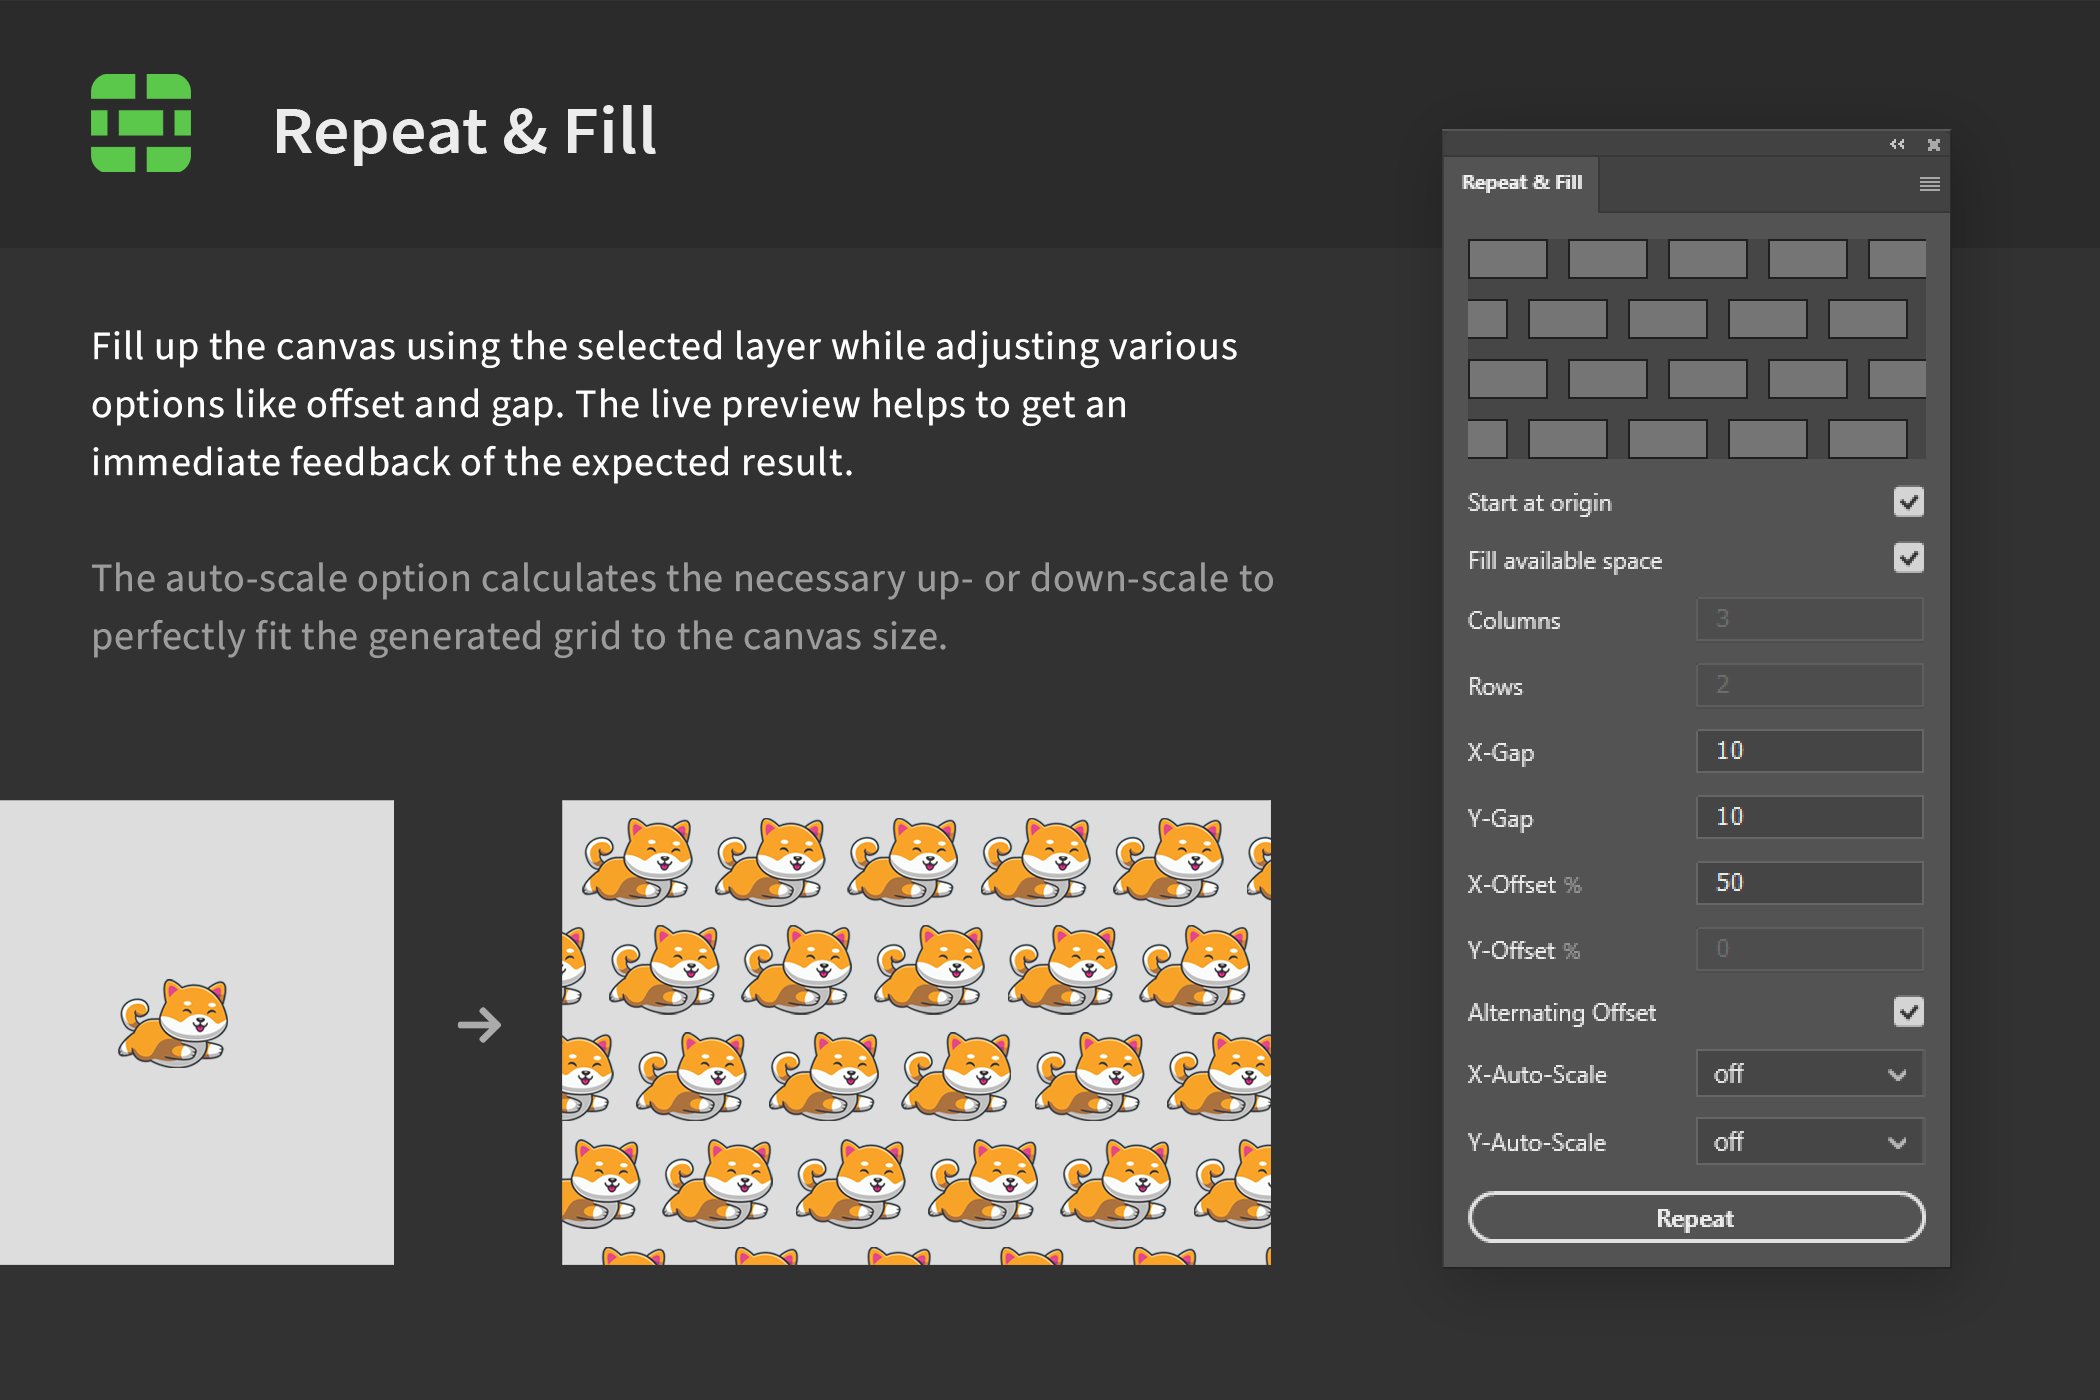 Repeat & Fill - Pattern Grid Creatorcover image.